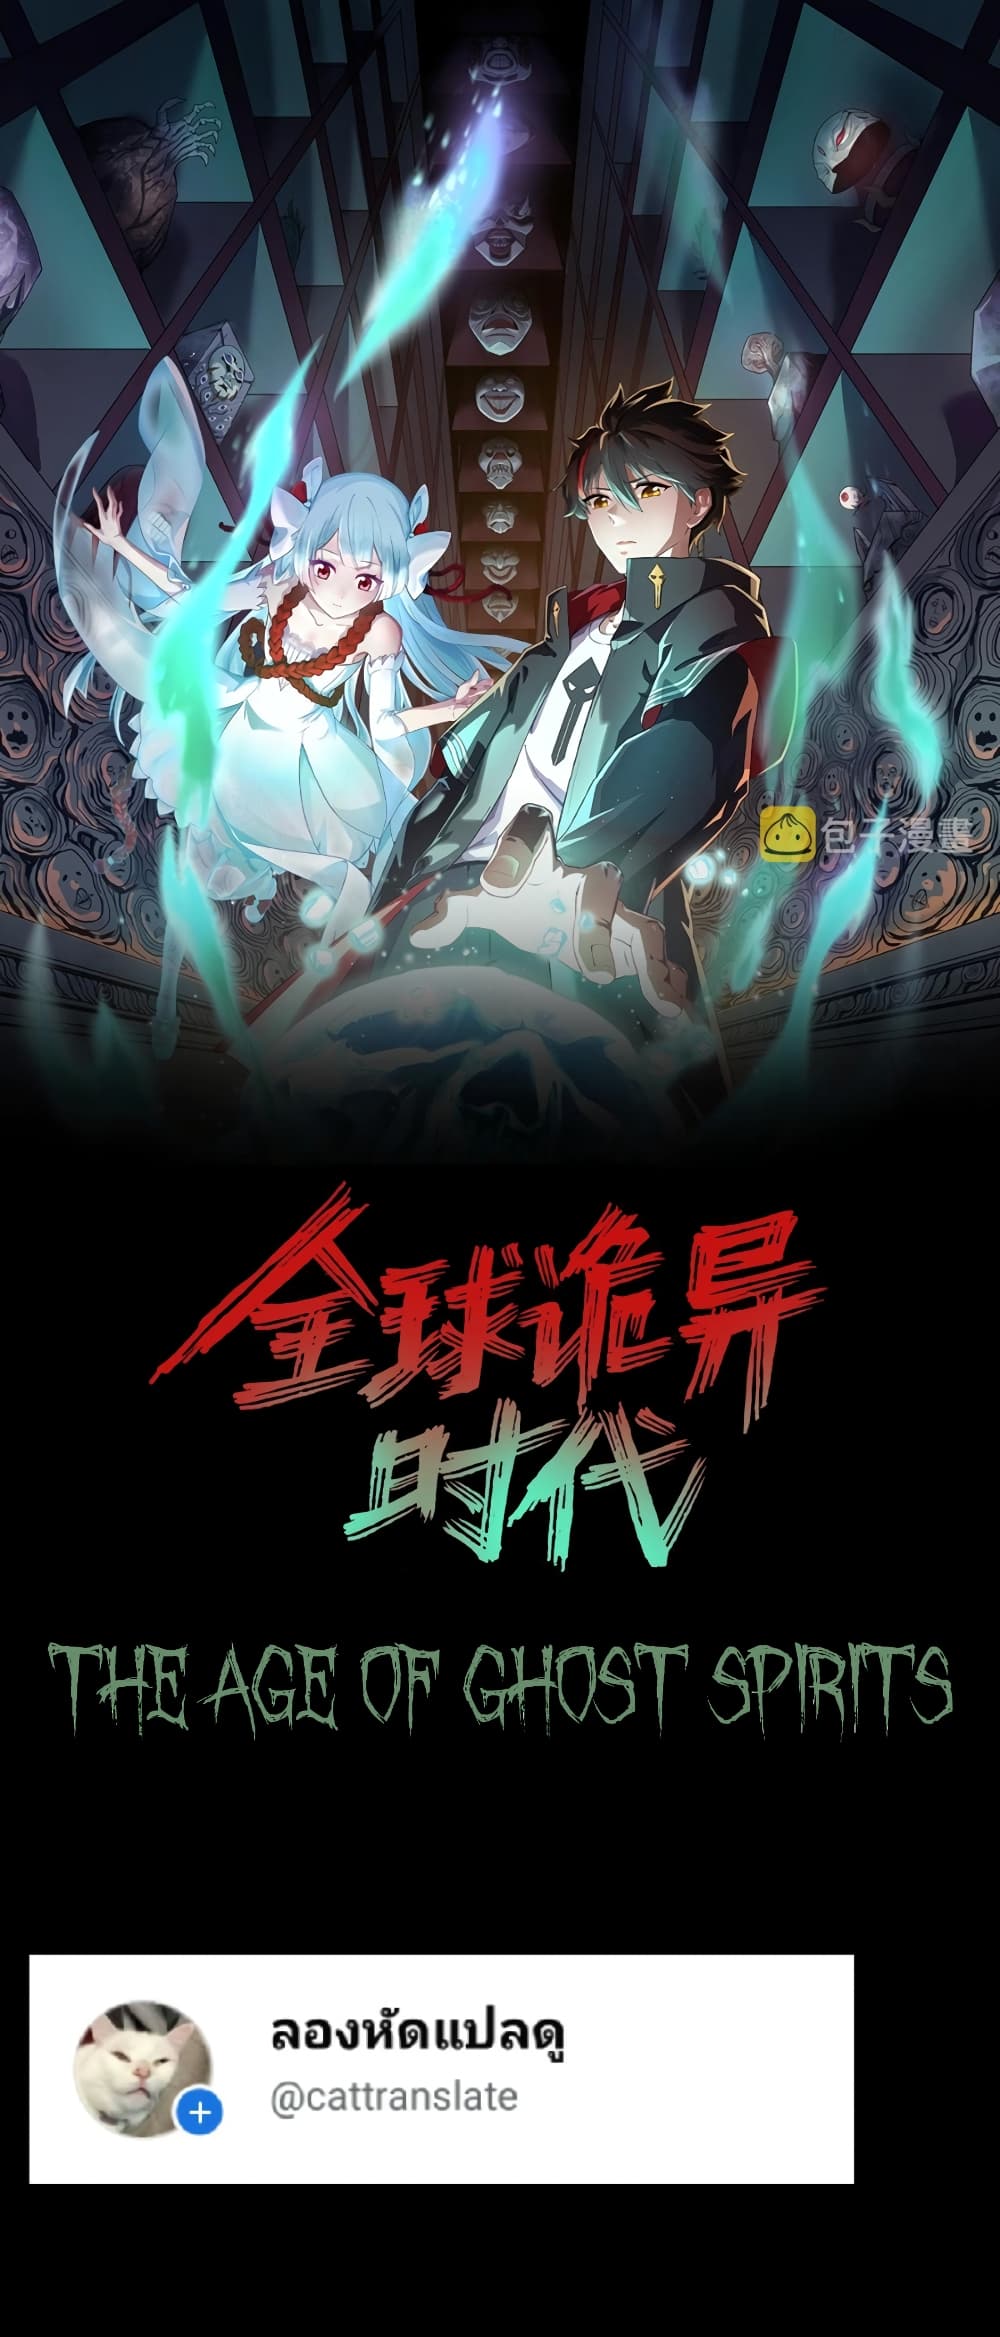 The Age of Ghost Spirits à¸à¸­à¸à¸à¸µà¹ 39 (1)